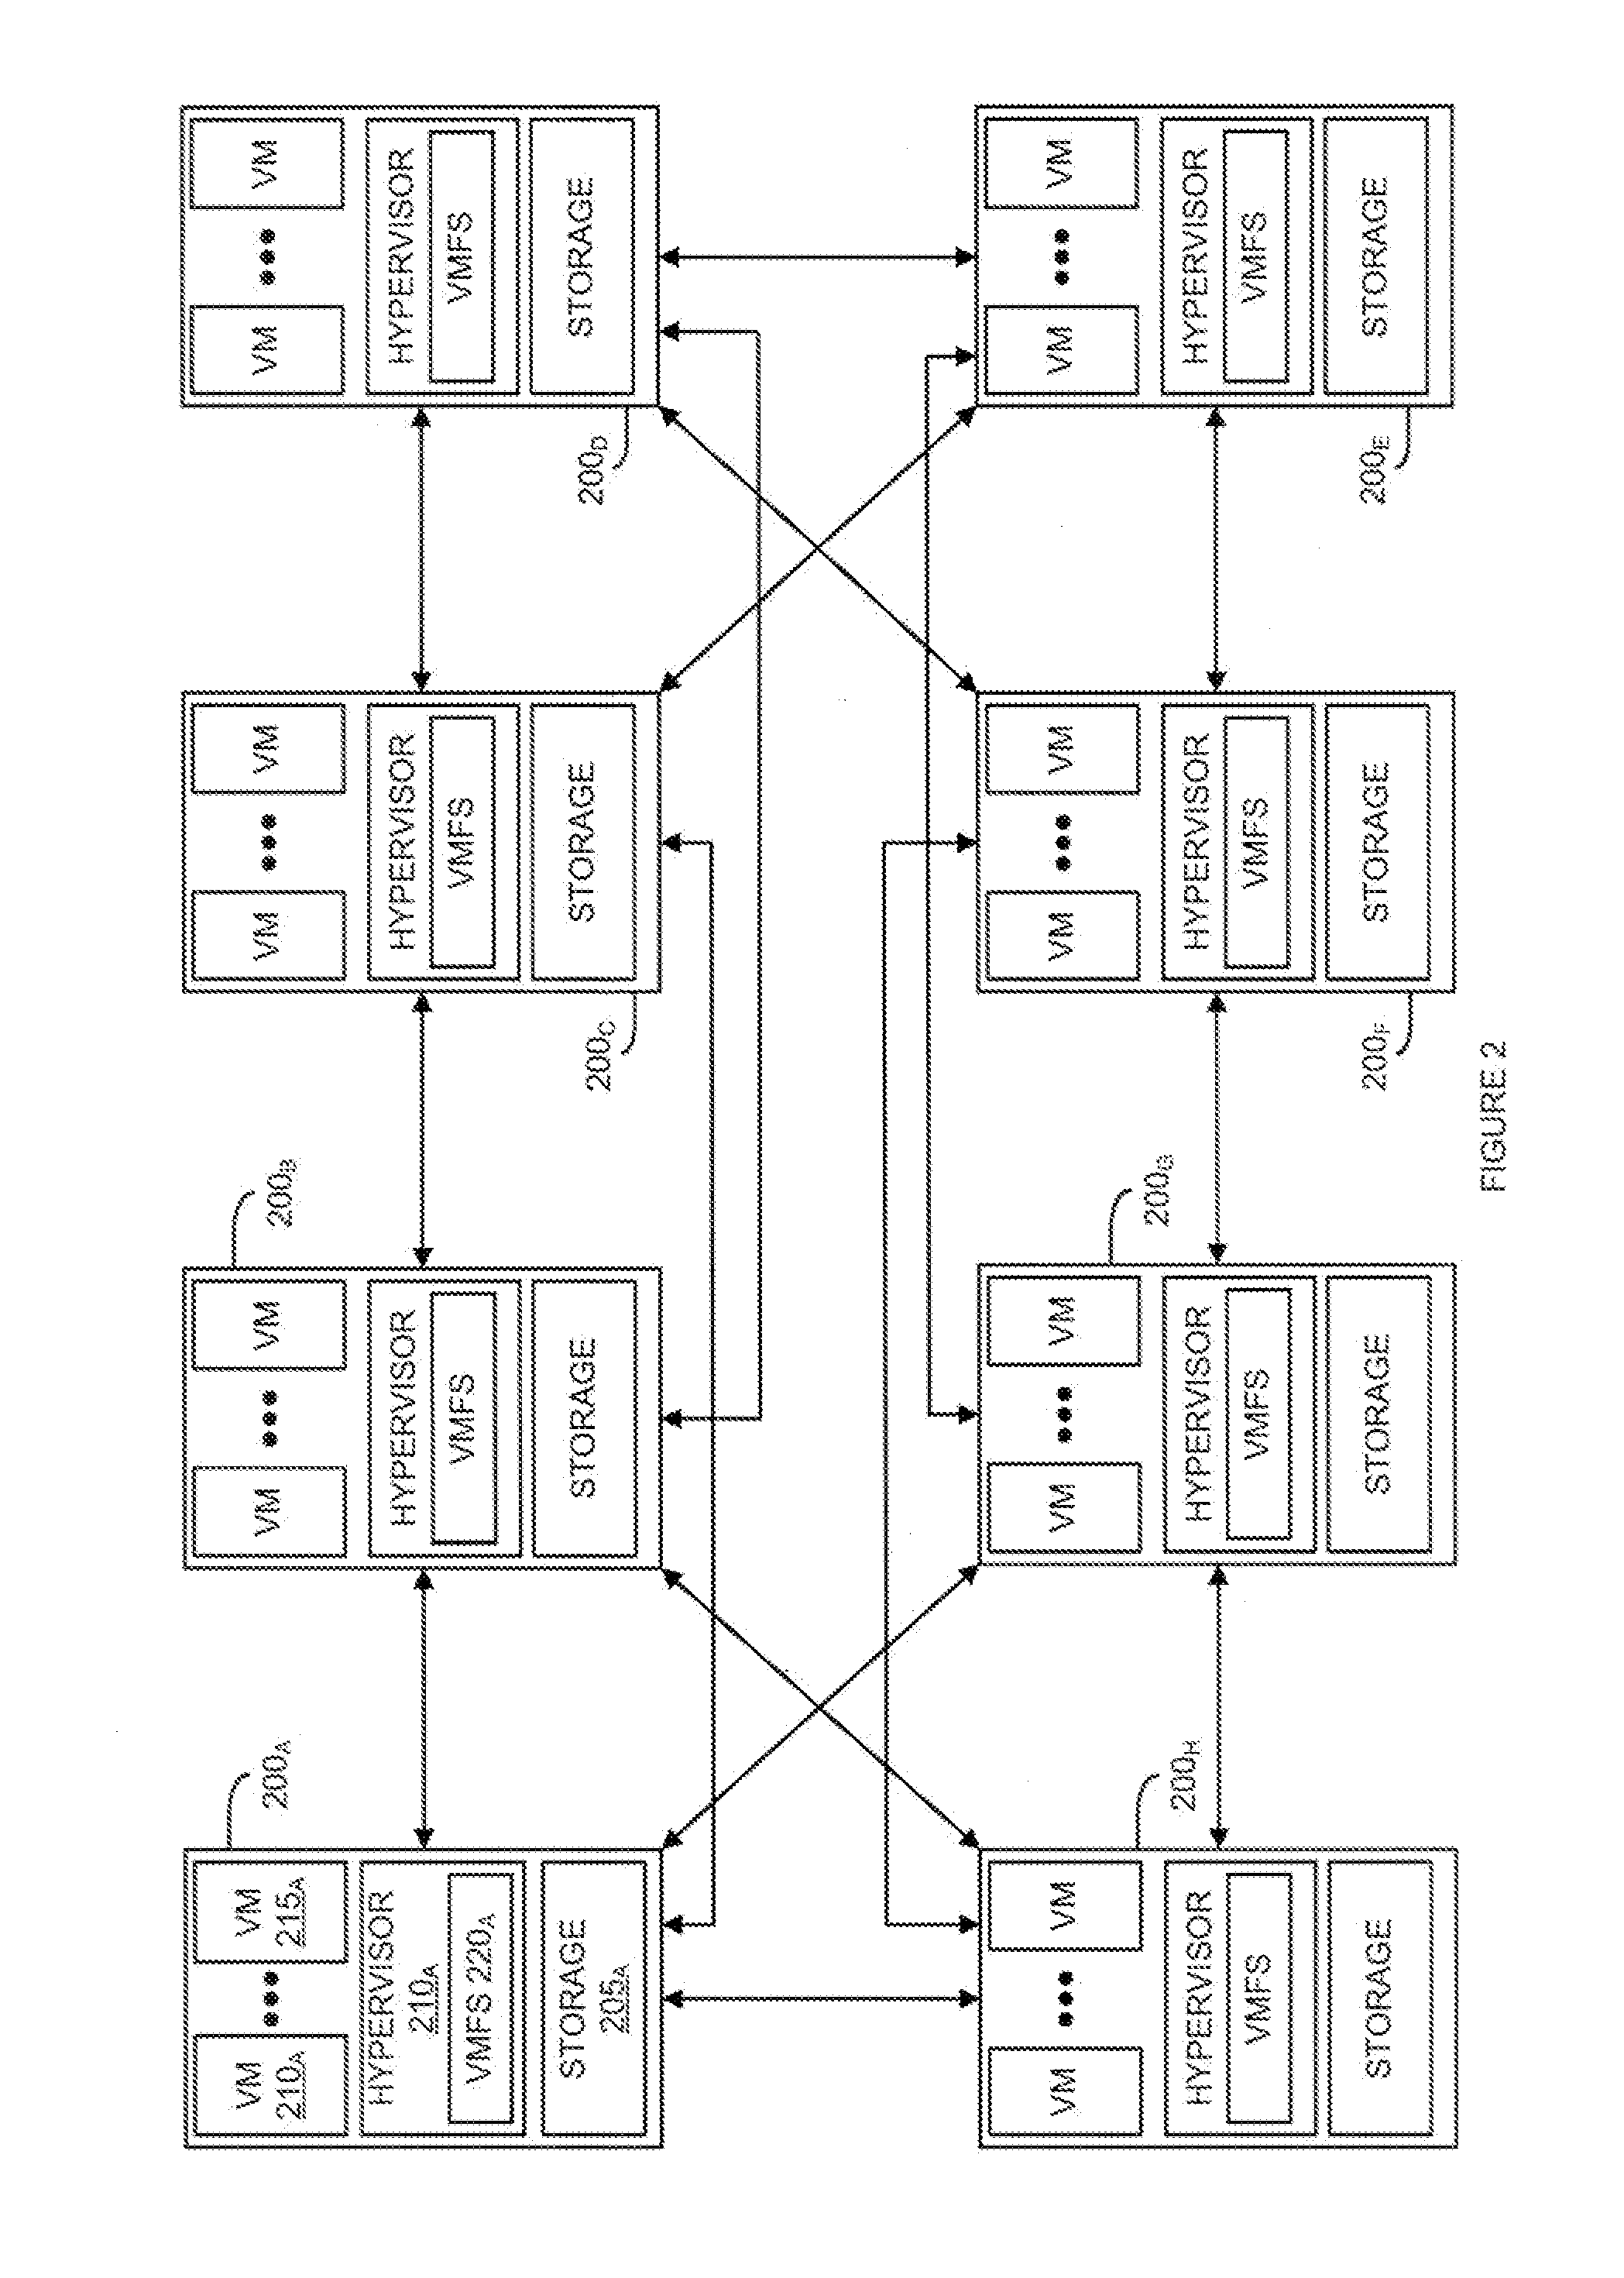 Method for Voting with Secret Shares in a Distributed System